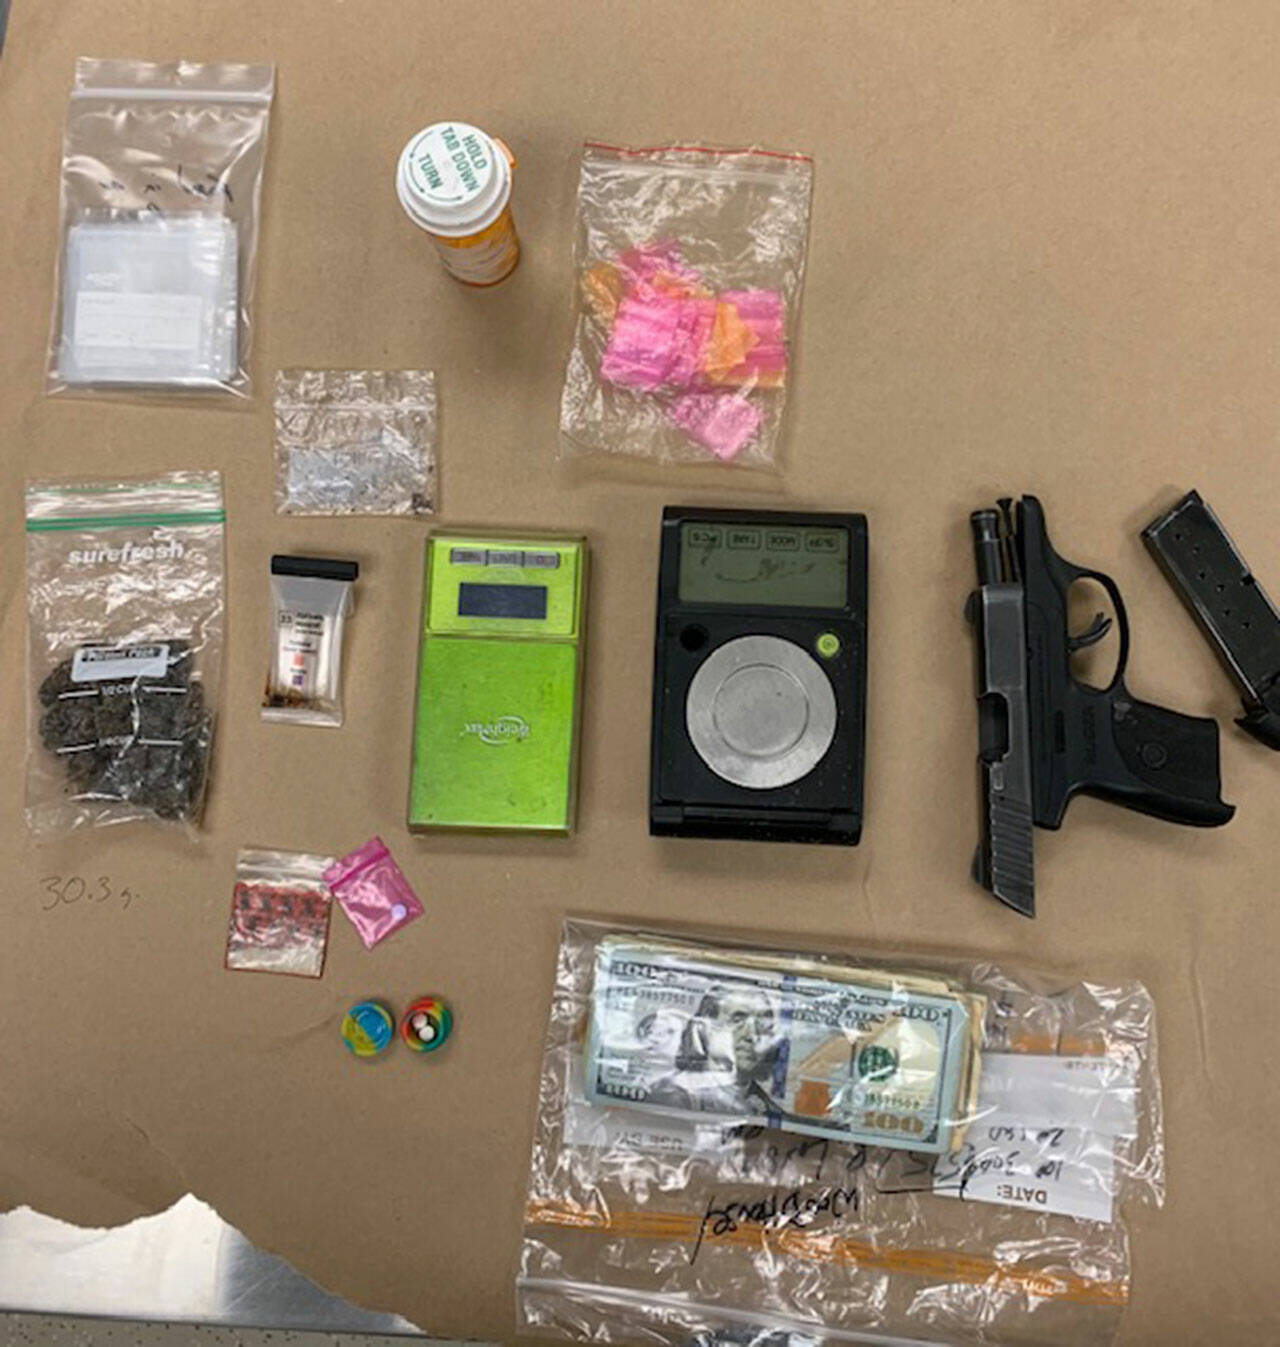 Evidence recovered from arrests at a Sequim apartment on March 28 include 30.3 grams of suspected fentanyl, 22.5 grams of suspected heroin, smaller quantities of various controlled substances, digital scales, packaging materials and a 9 mm pistol.